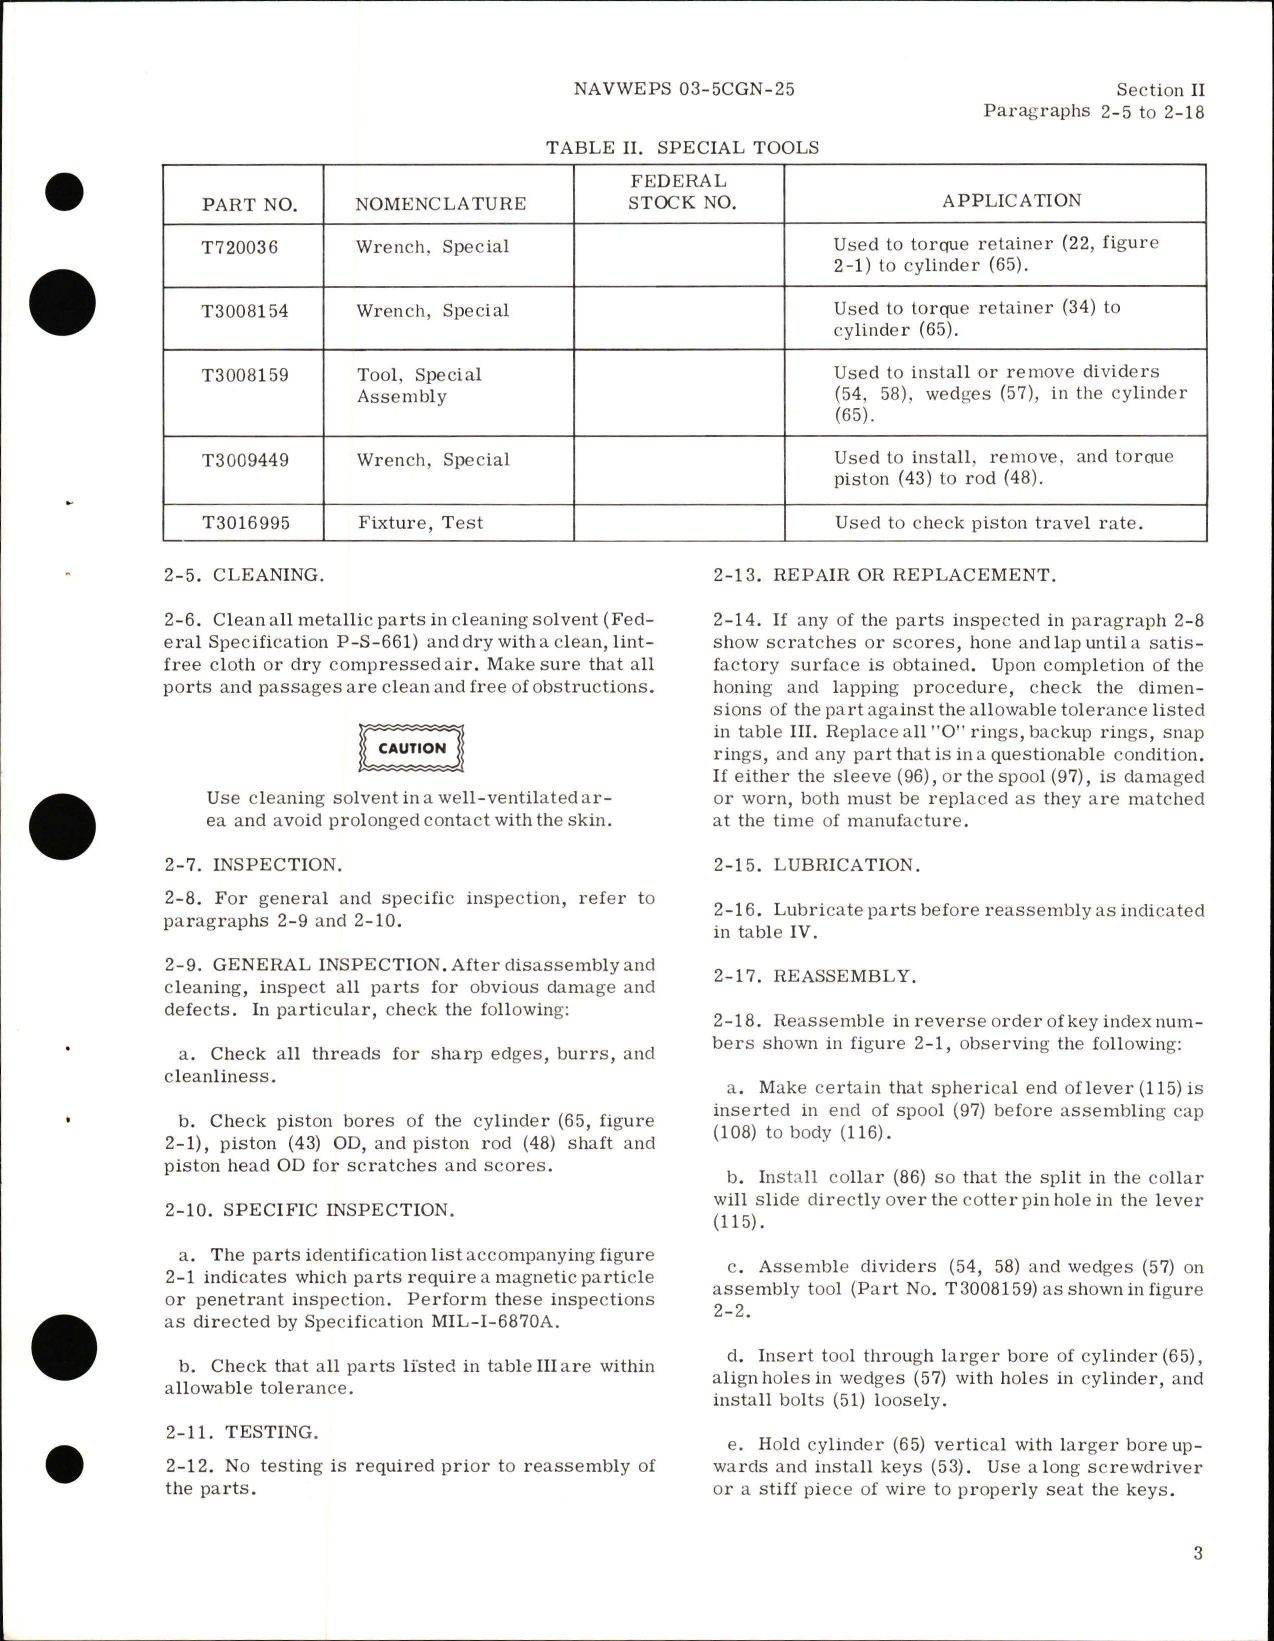 Sample page 5 from AirCorps Library document: Overhaul Instructions for Hydraulic Flight Control Horizontal Stabilizer Actuator Assembly - Part 247-58710 Series